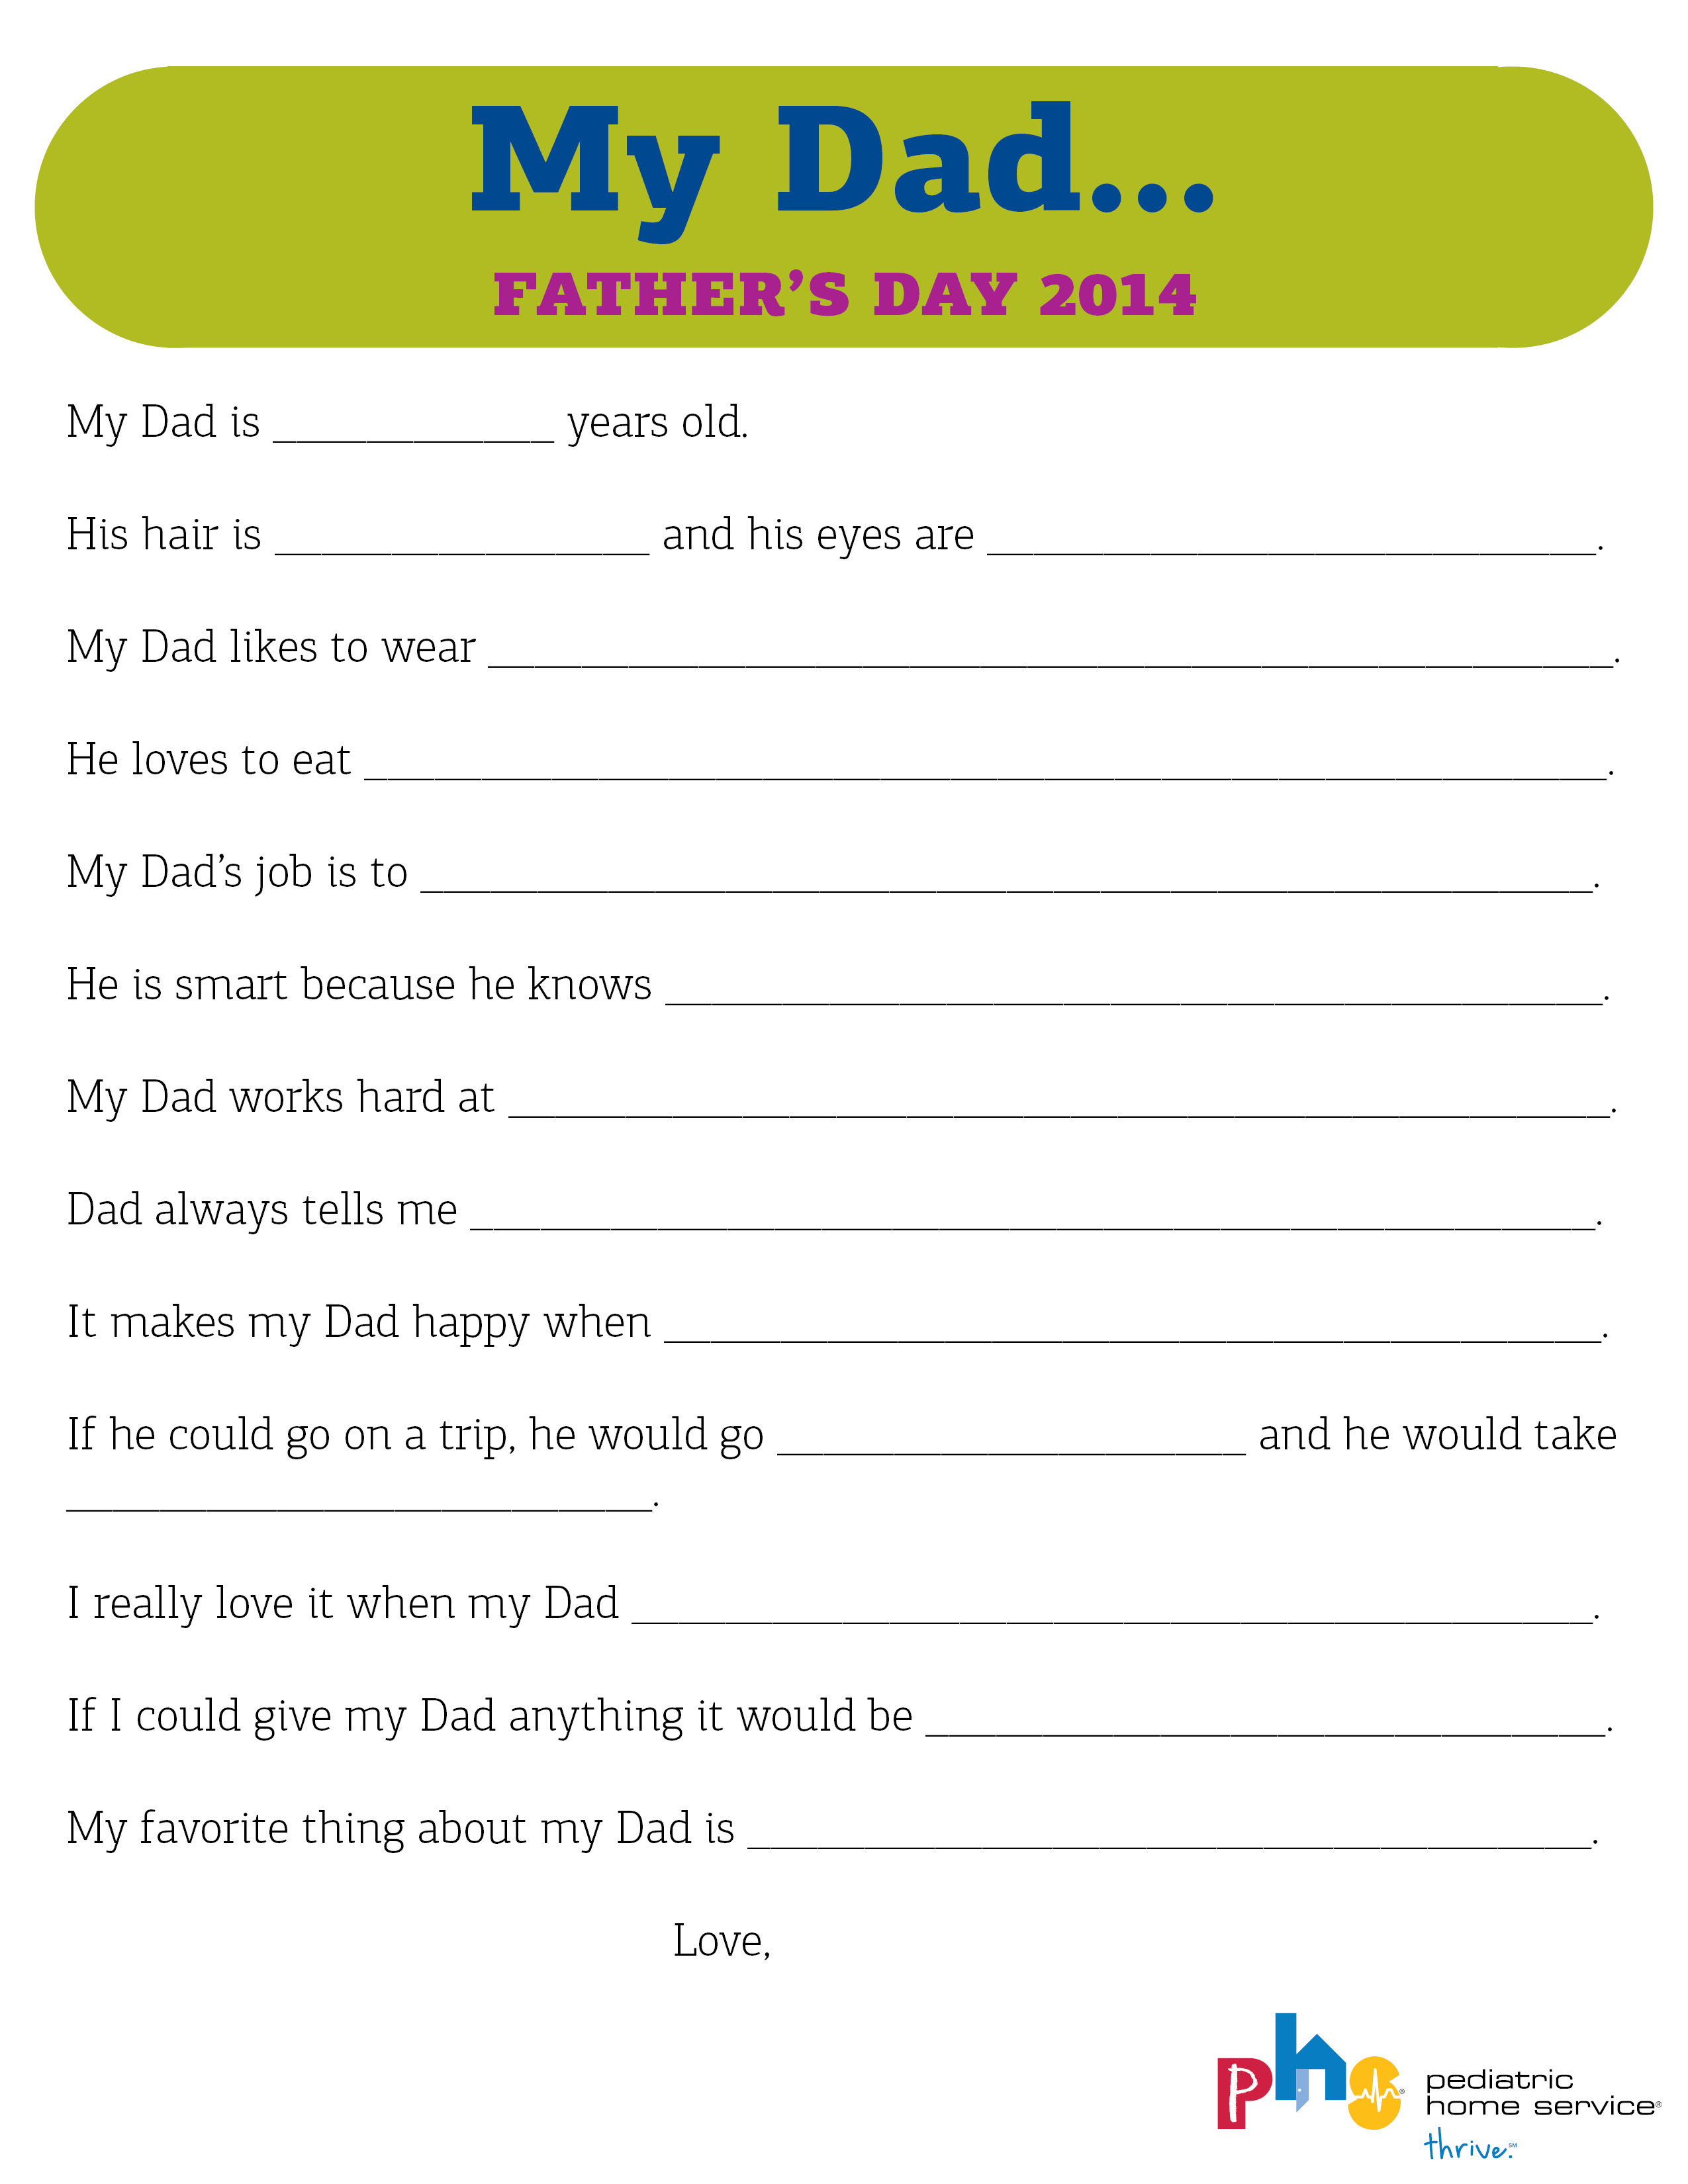 Dad_fill in the blank_6.13.14